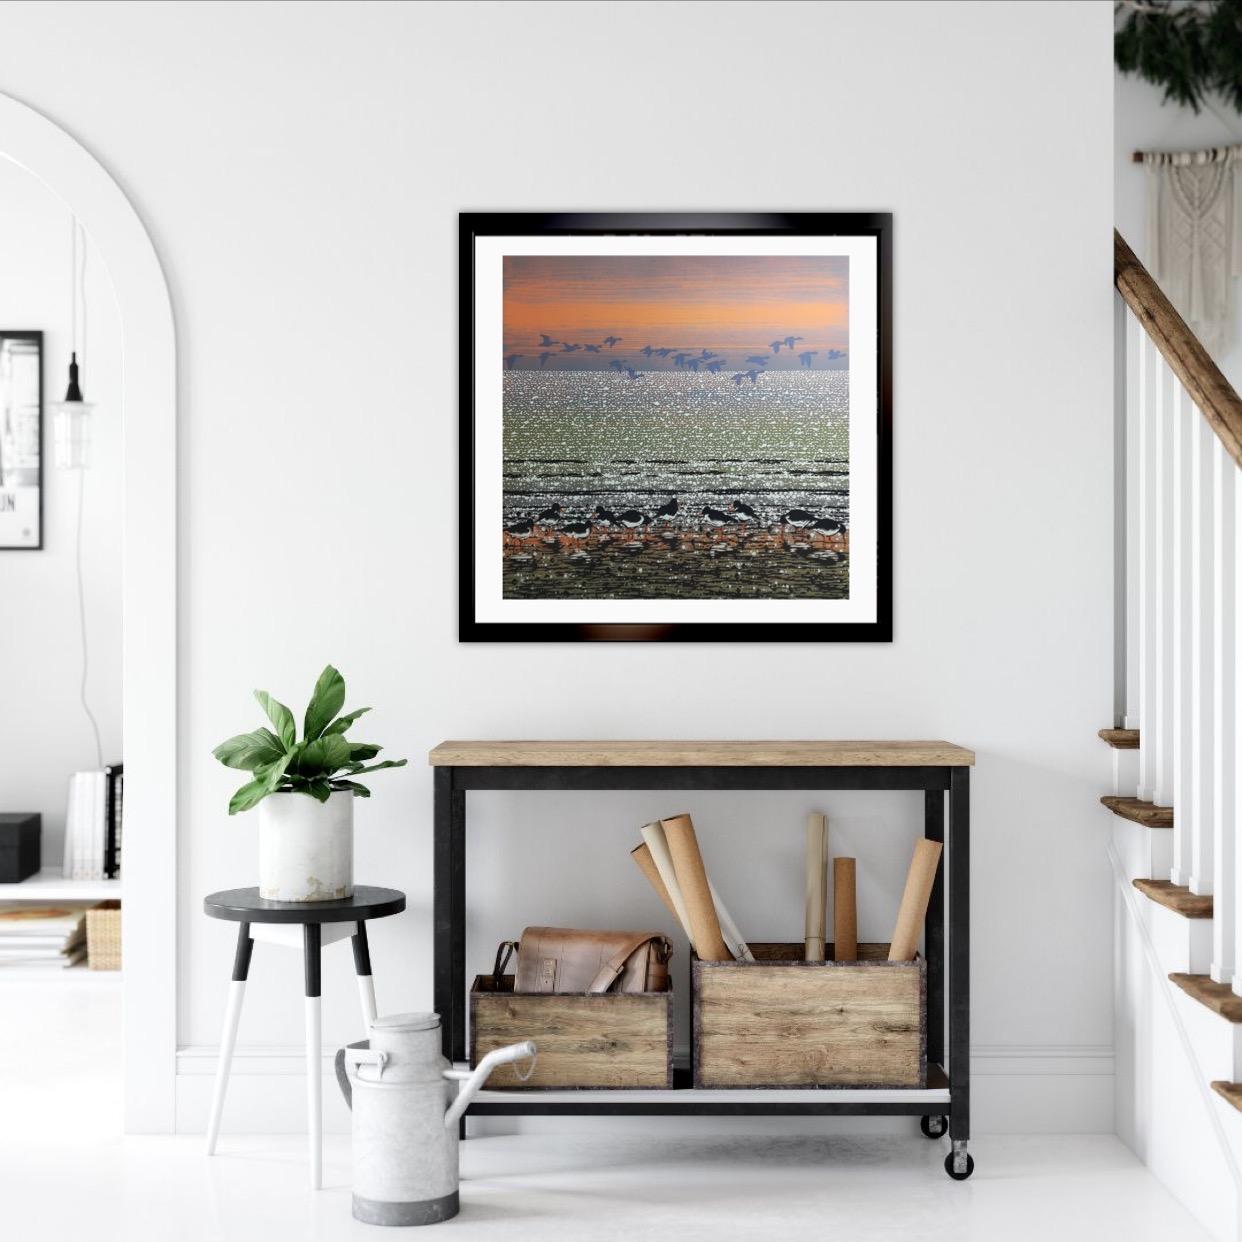 Oyster Catchers with Geese, Limited Edition Print, Seascape Art, Affordable Art - Gray Interior Print by Mark Pearce